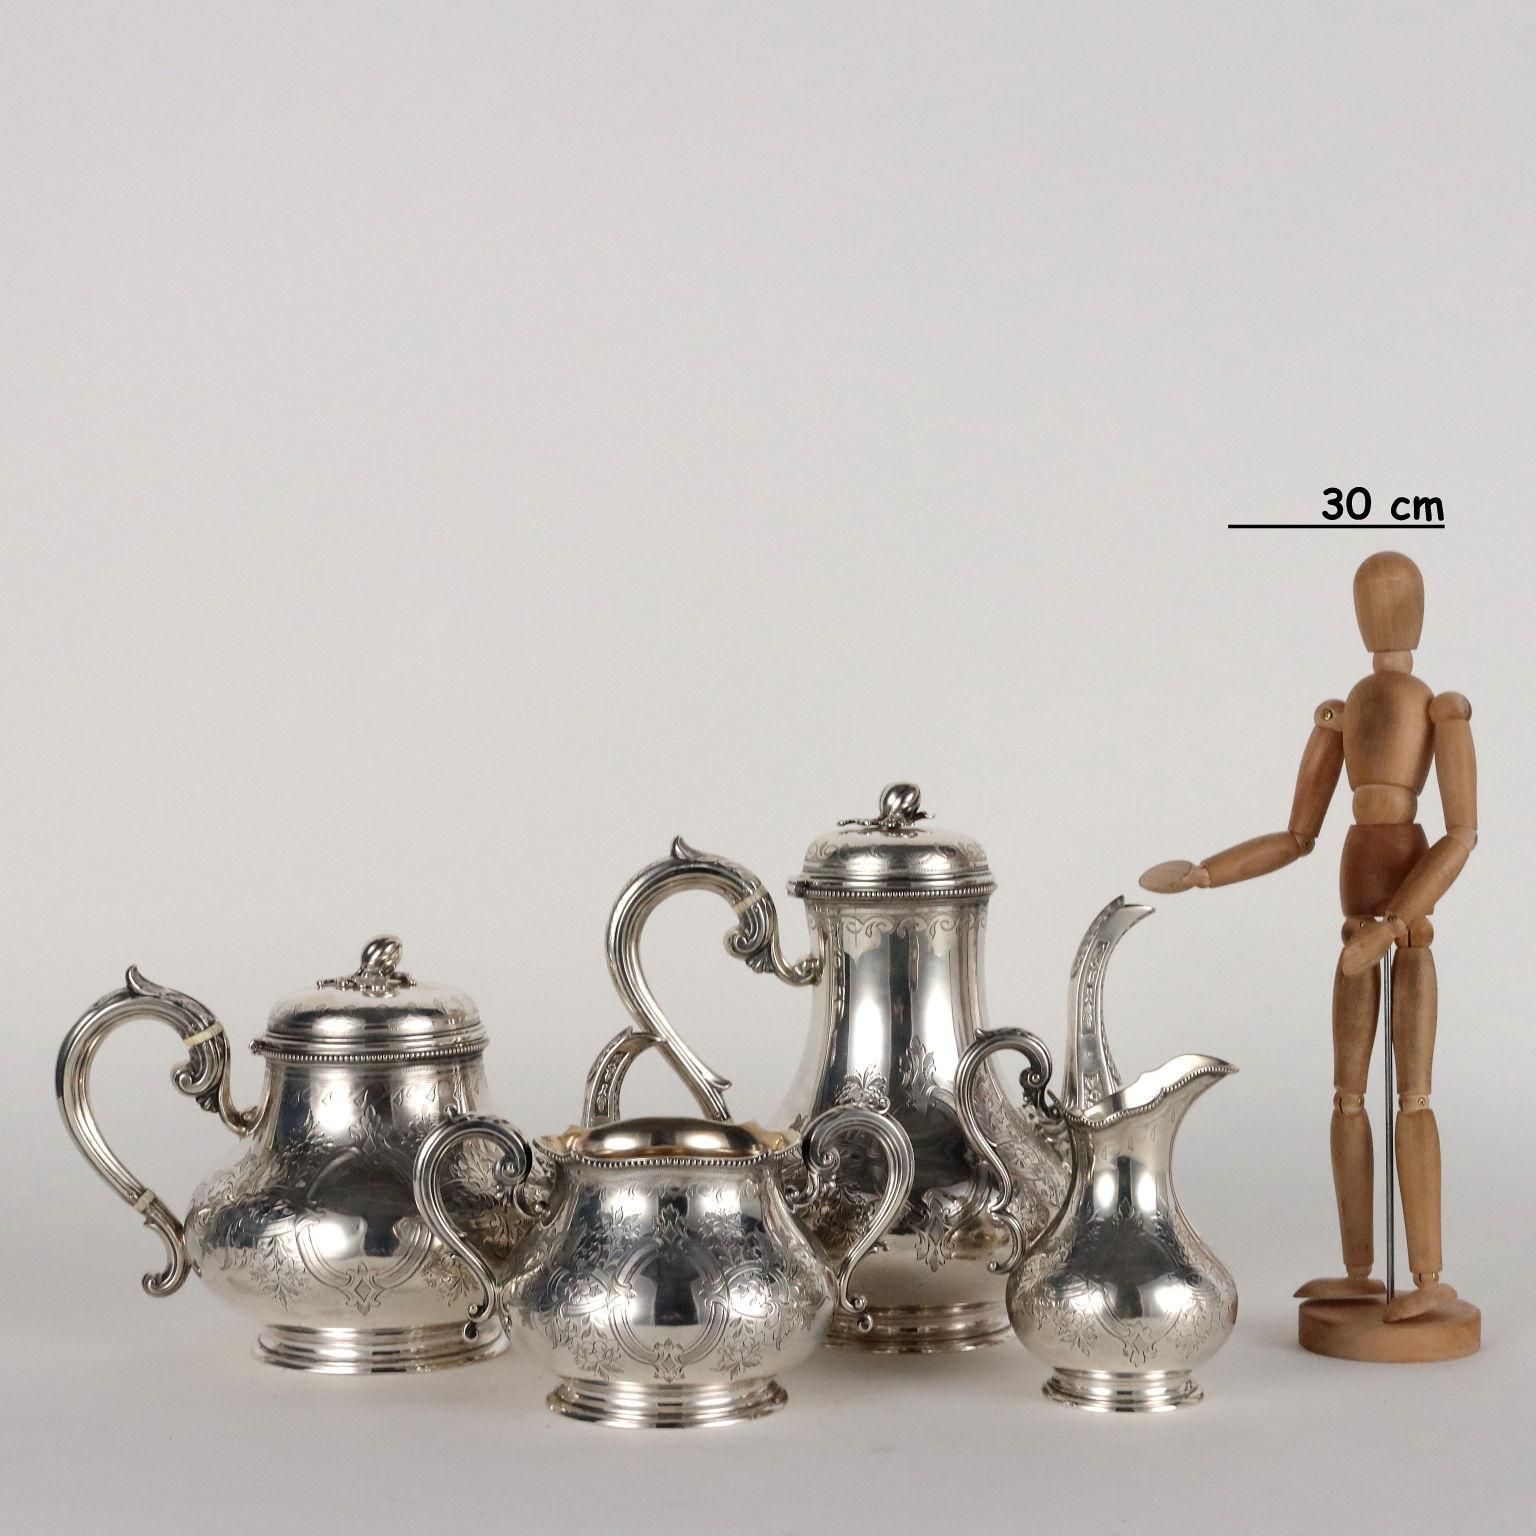 Engraved and chiseled 925 sterling silver tea and coffee set. Fruit and leaf catchers. The service consists of teapot, coffee pot, milk jug and sugar bowl. Silver and silversmith's marks engraved under the bases. 2090 grams.